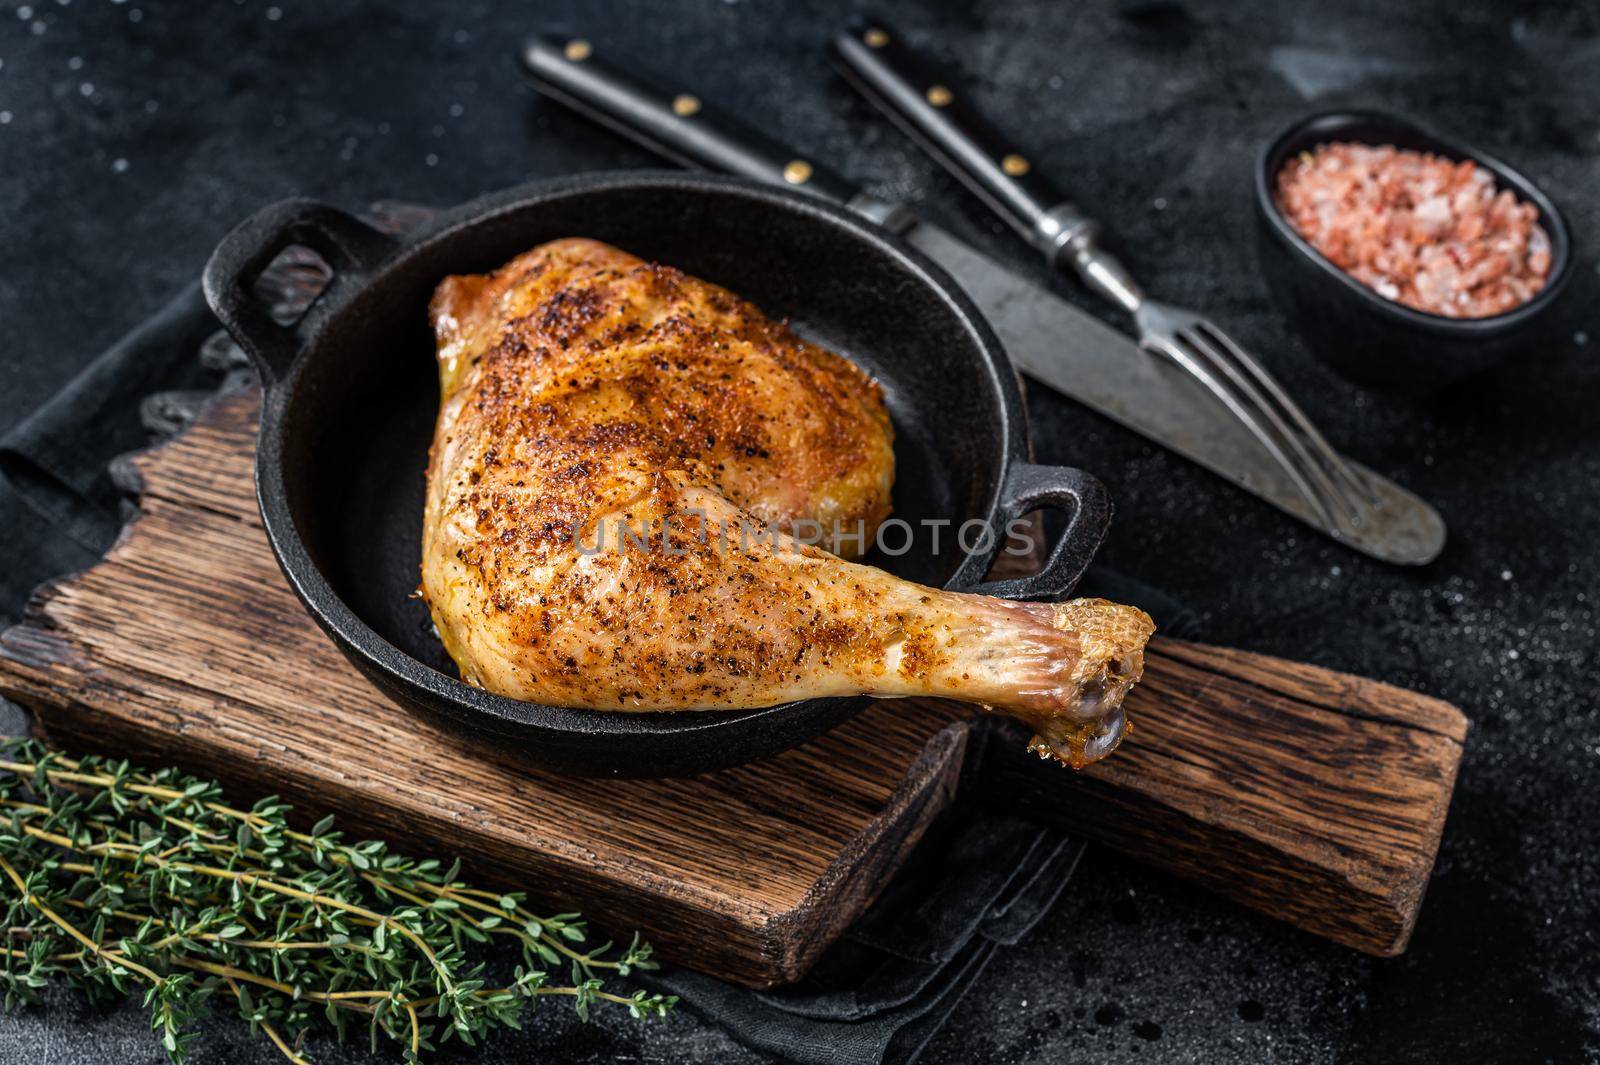 Fried bbq chicken leg in a pan. Black background. Top view.